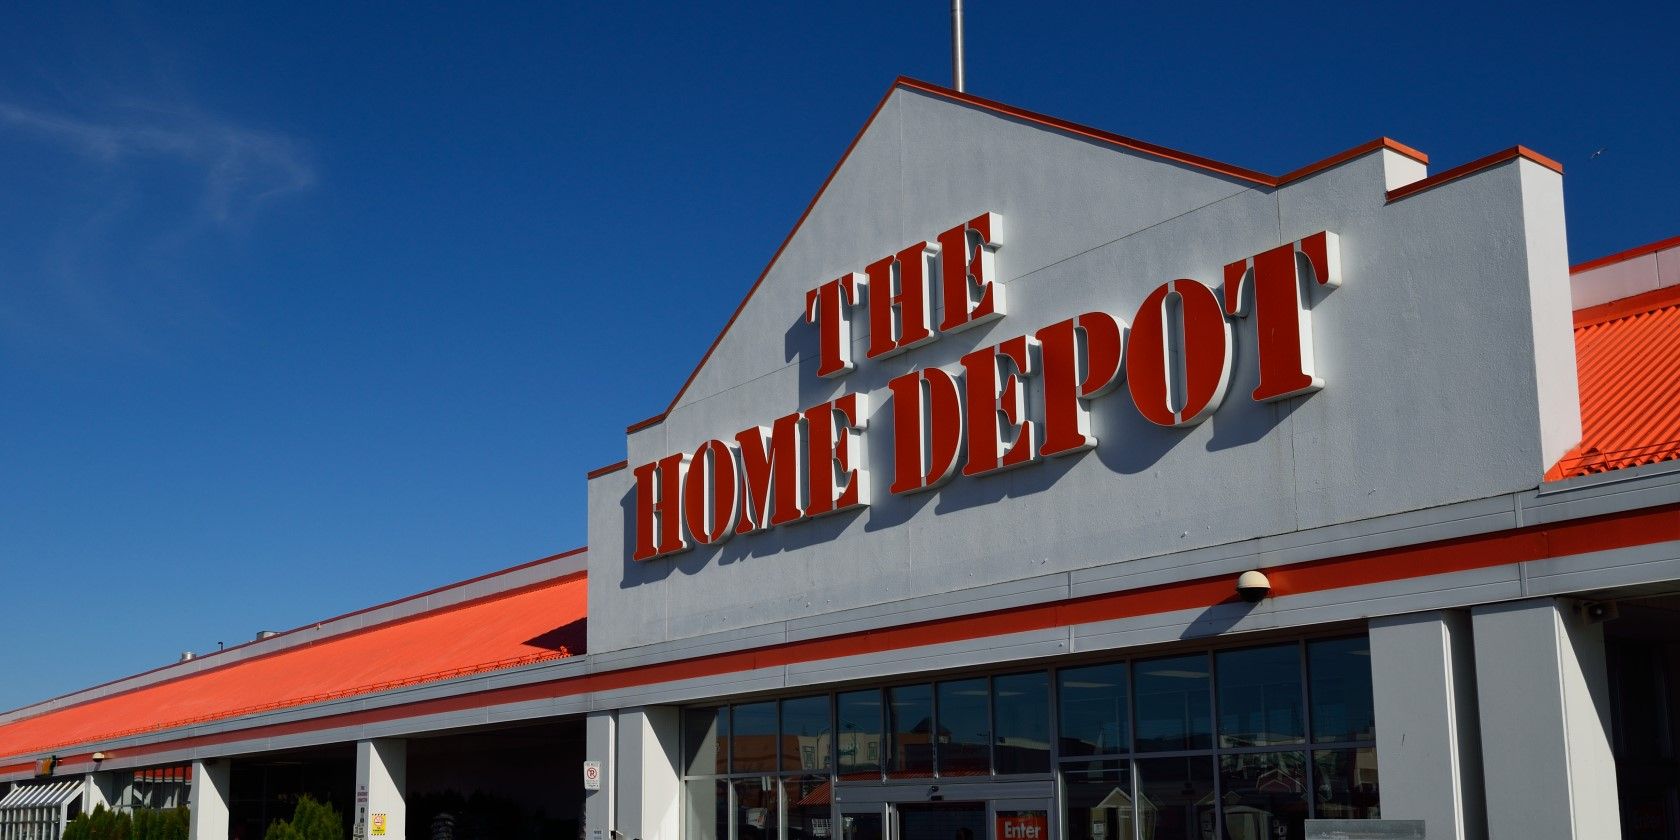 View of Home Depot store from outside